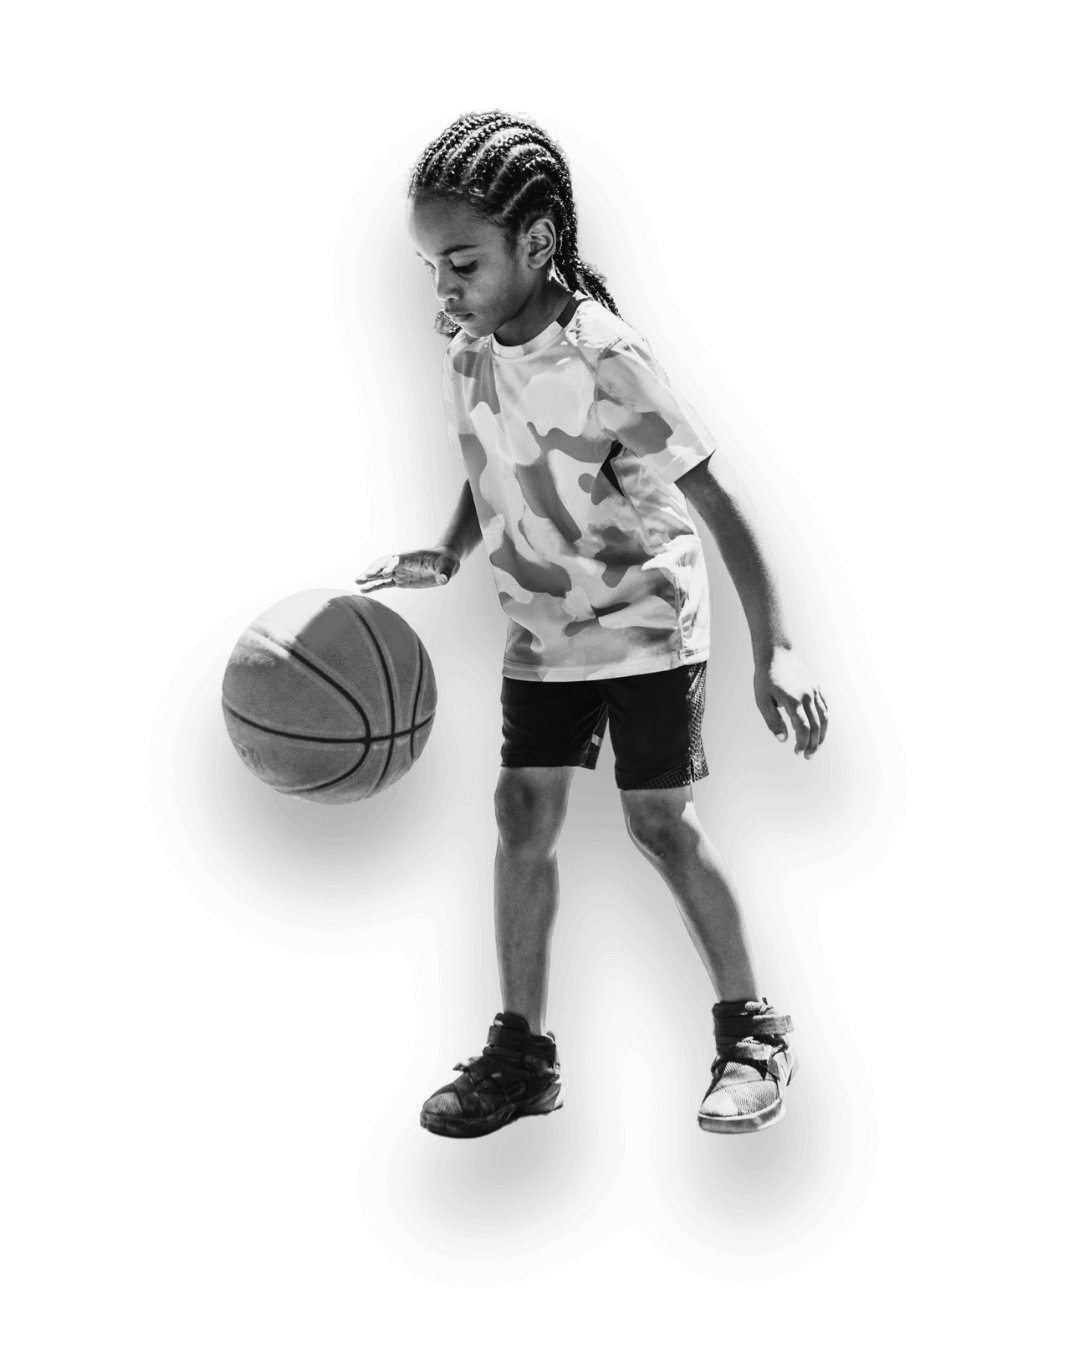 young child dribbling a basketball